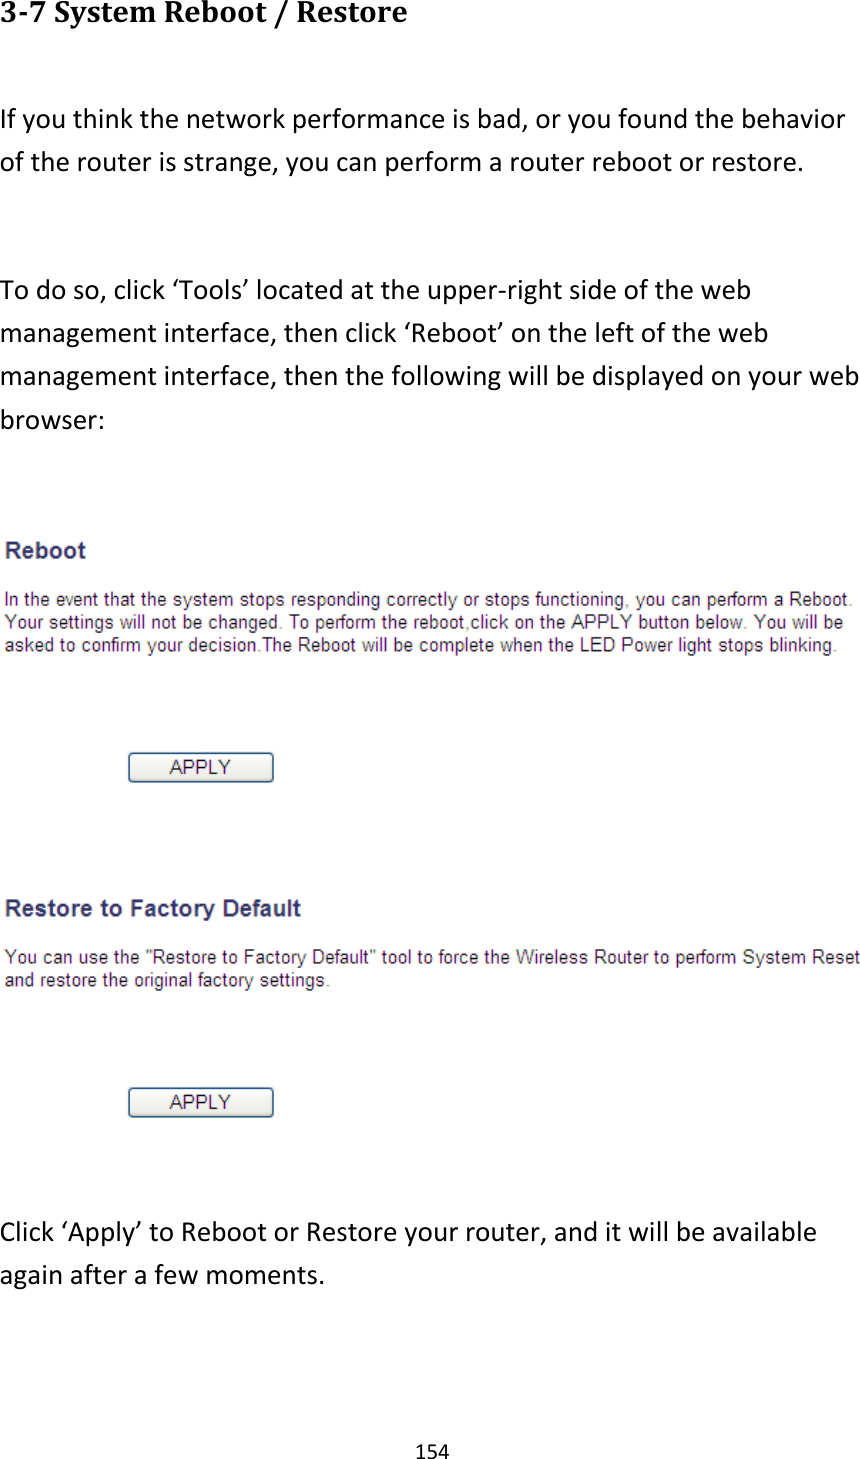 154 3-7 System Reboot / Restore  If you think the network performance is bad, or you found the behavior of the router is strange, you can perform a router reboot or restore.  To do so, click ‘Tools’ located at the upper-right side of the web management interface, then click ‘Reboot’ on the left of the web management interface, then the following will be displayed on your web browser:    Click ‘Apply’ to Reboot or Restore your router, and it will be available again after a few moments.  